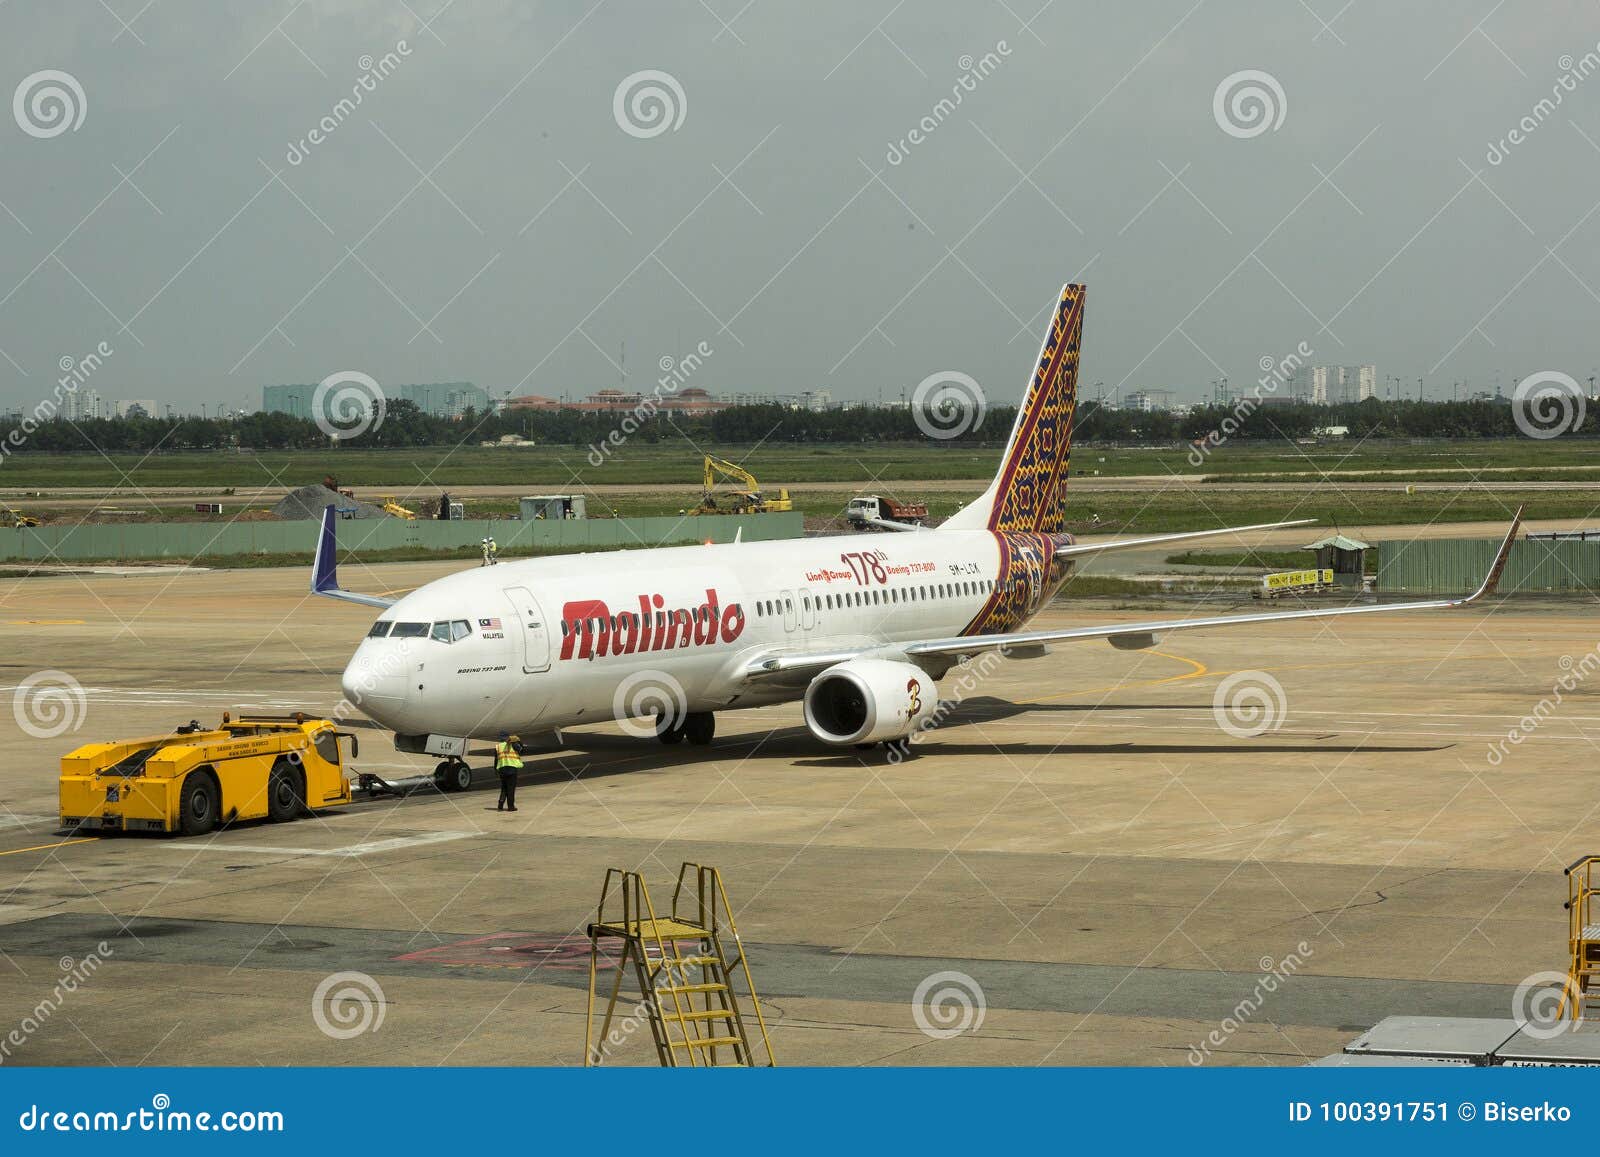 Malindo Air Airline Logo On The Mobile Phone Screen With A Plane ...